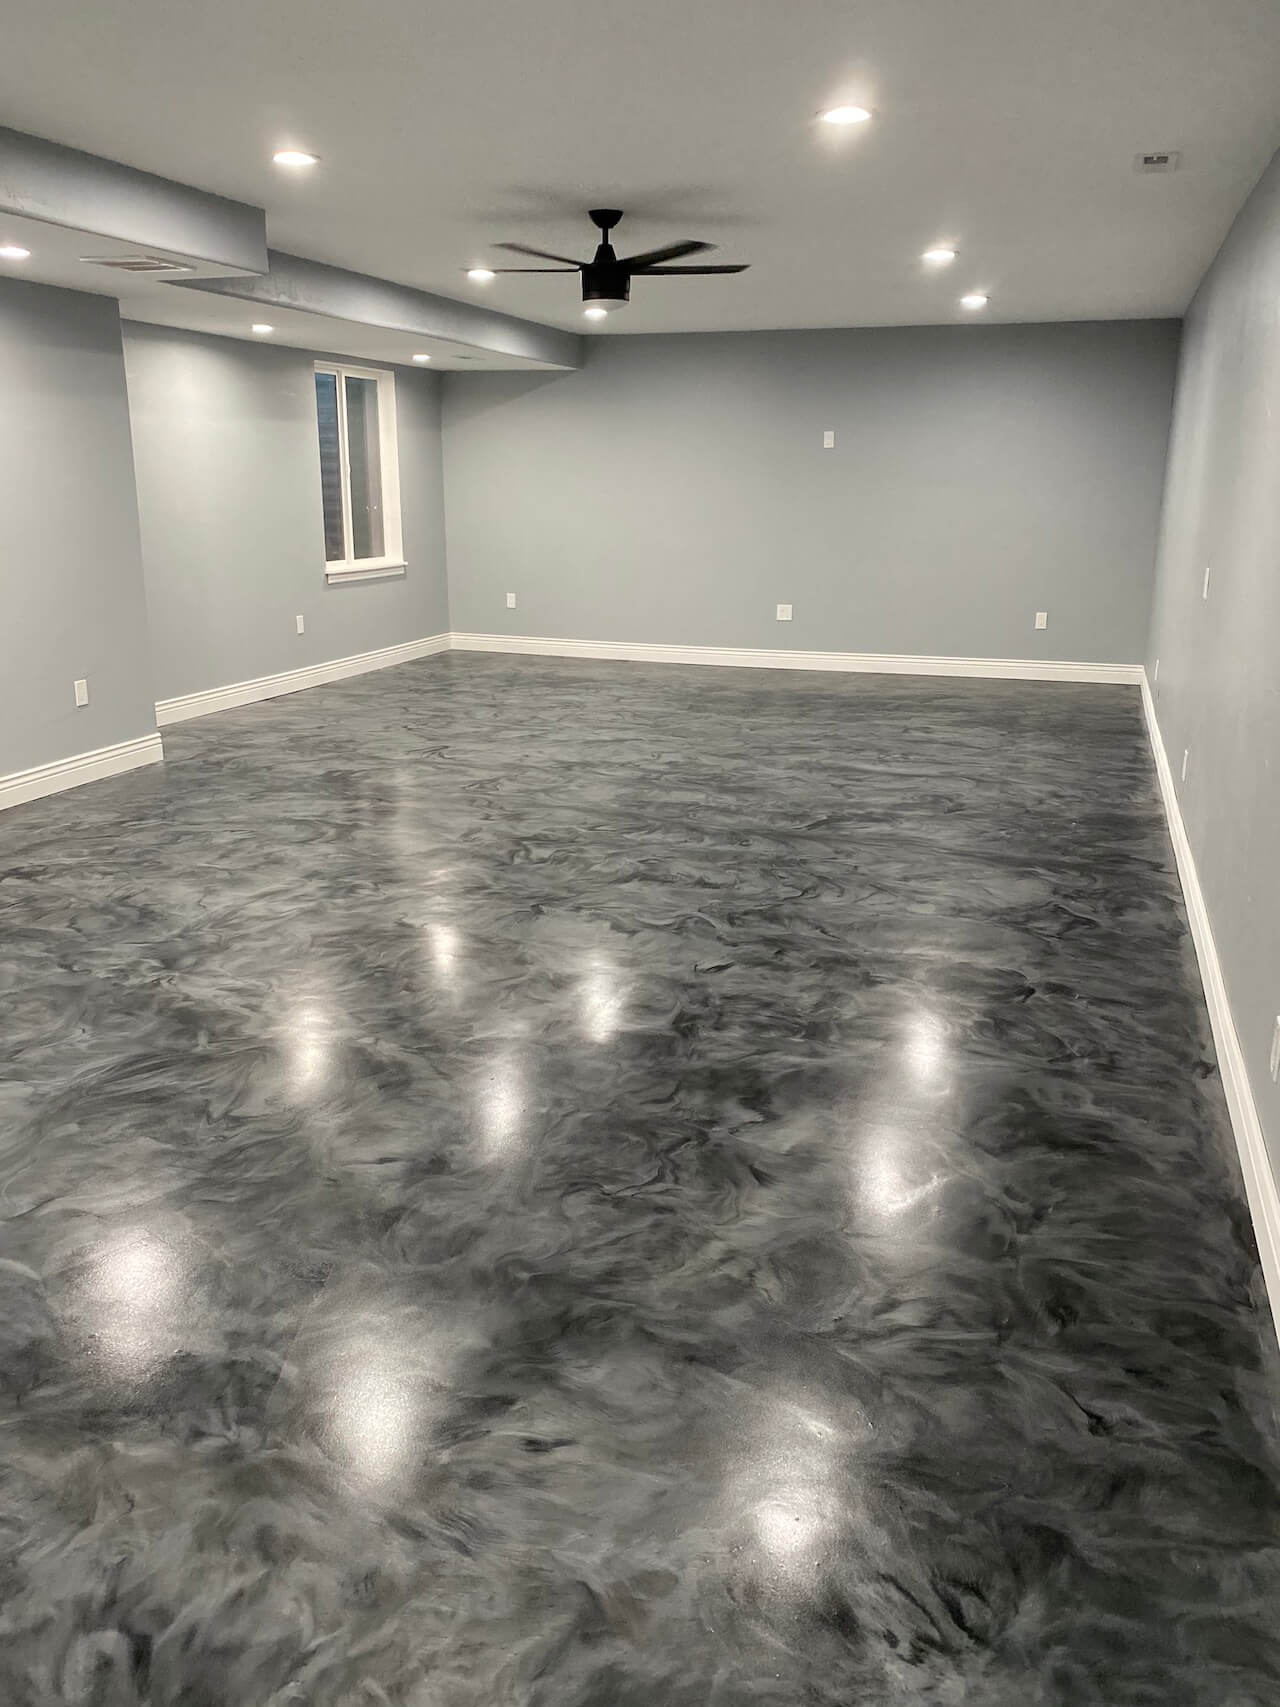 A basement that has been remodeled with Leggari epoxy floors in gray and black, new white trim, and freshly painted gray walls.